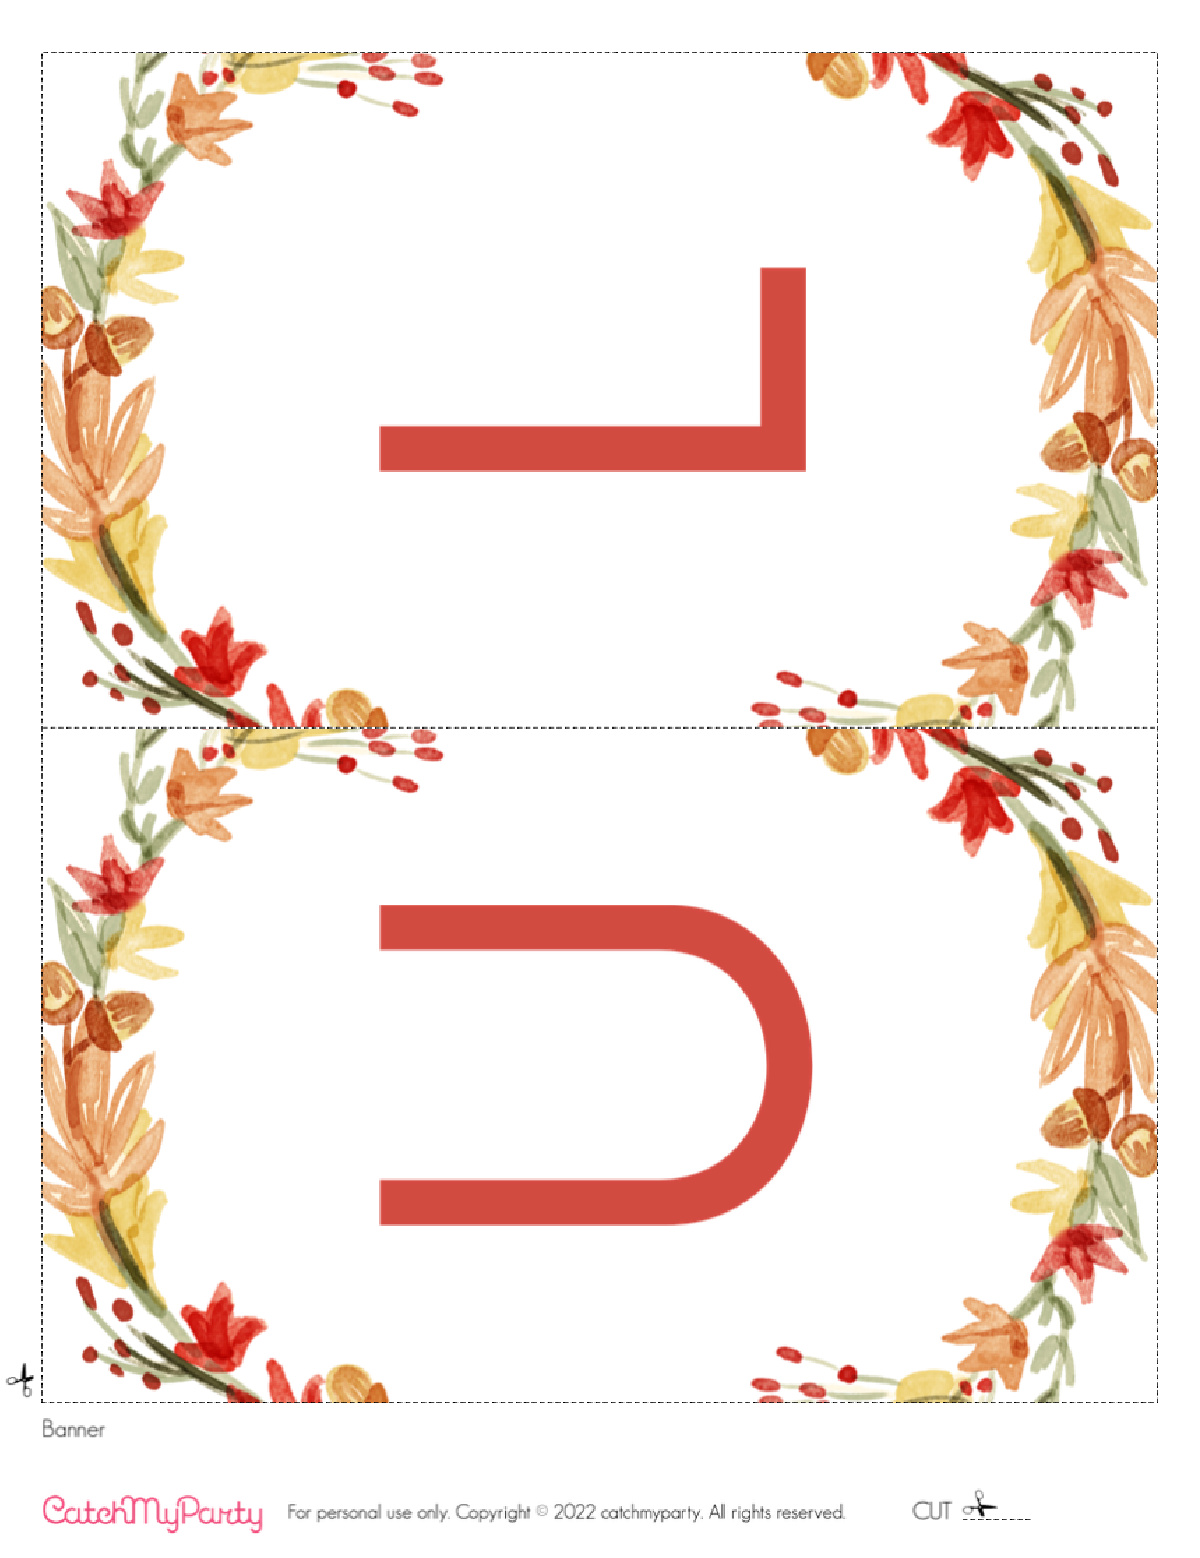 Download these FREE Friendsgiving Printables - Grateful Banner